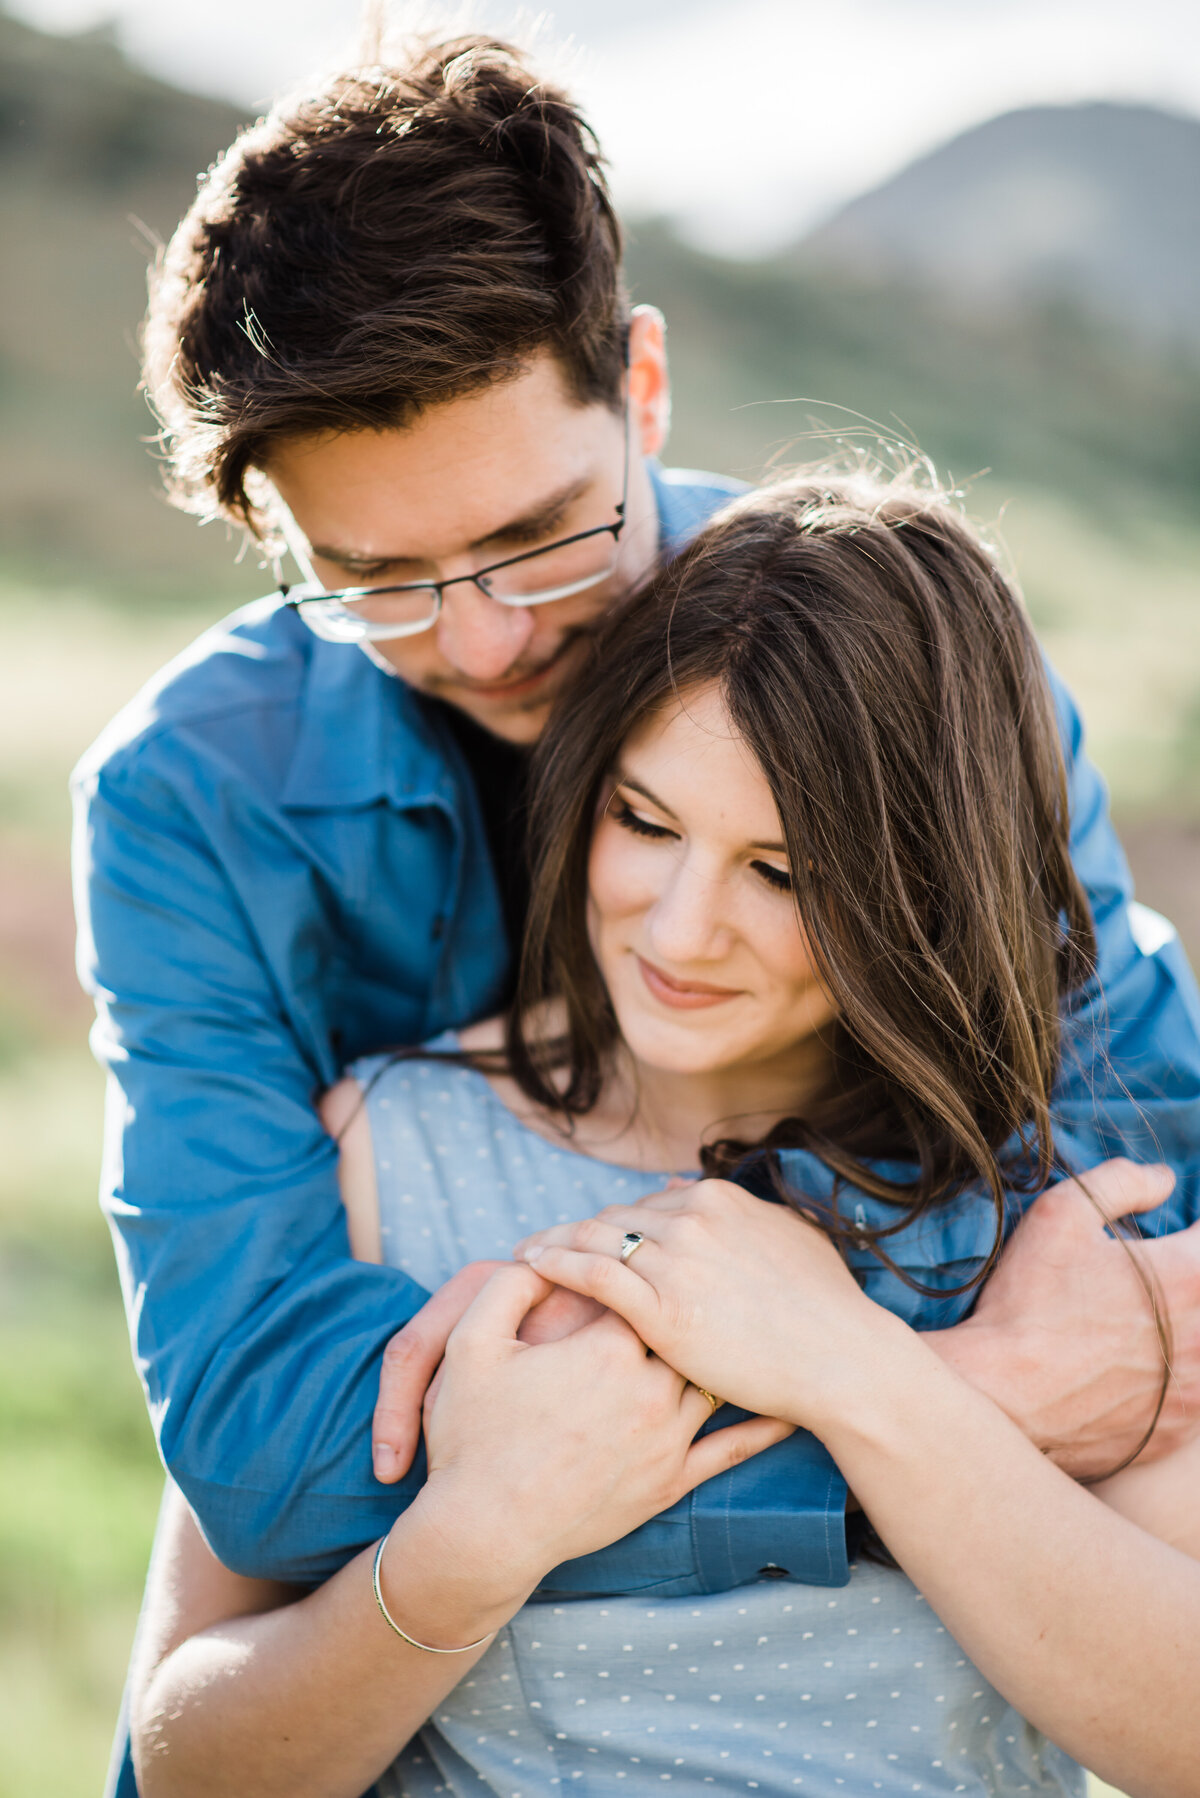 denver engagement photographer captures colorado engagement photos with man standing behind woman while wrapping his arms around the woman's shoulders as she smiles and looks down